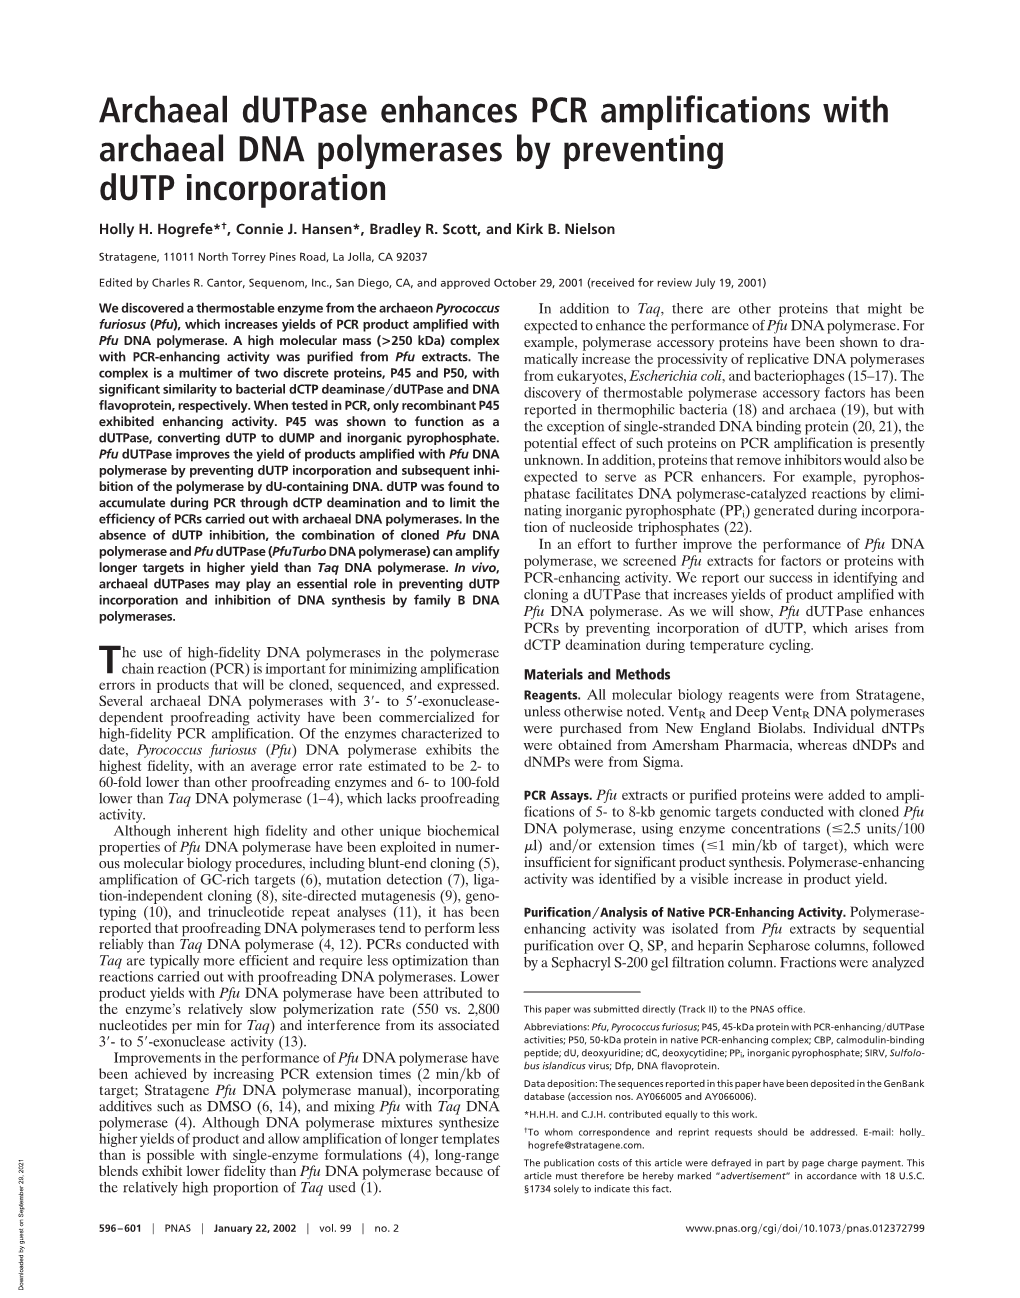 Archaeal Dutpase Enhances PCR Amplifications with Archaeal DNA Polymerases by Preventing Dutp Incorporation